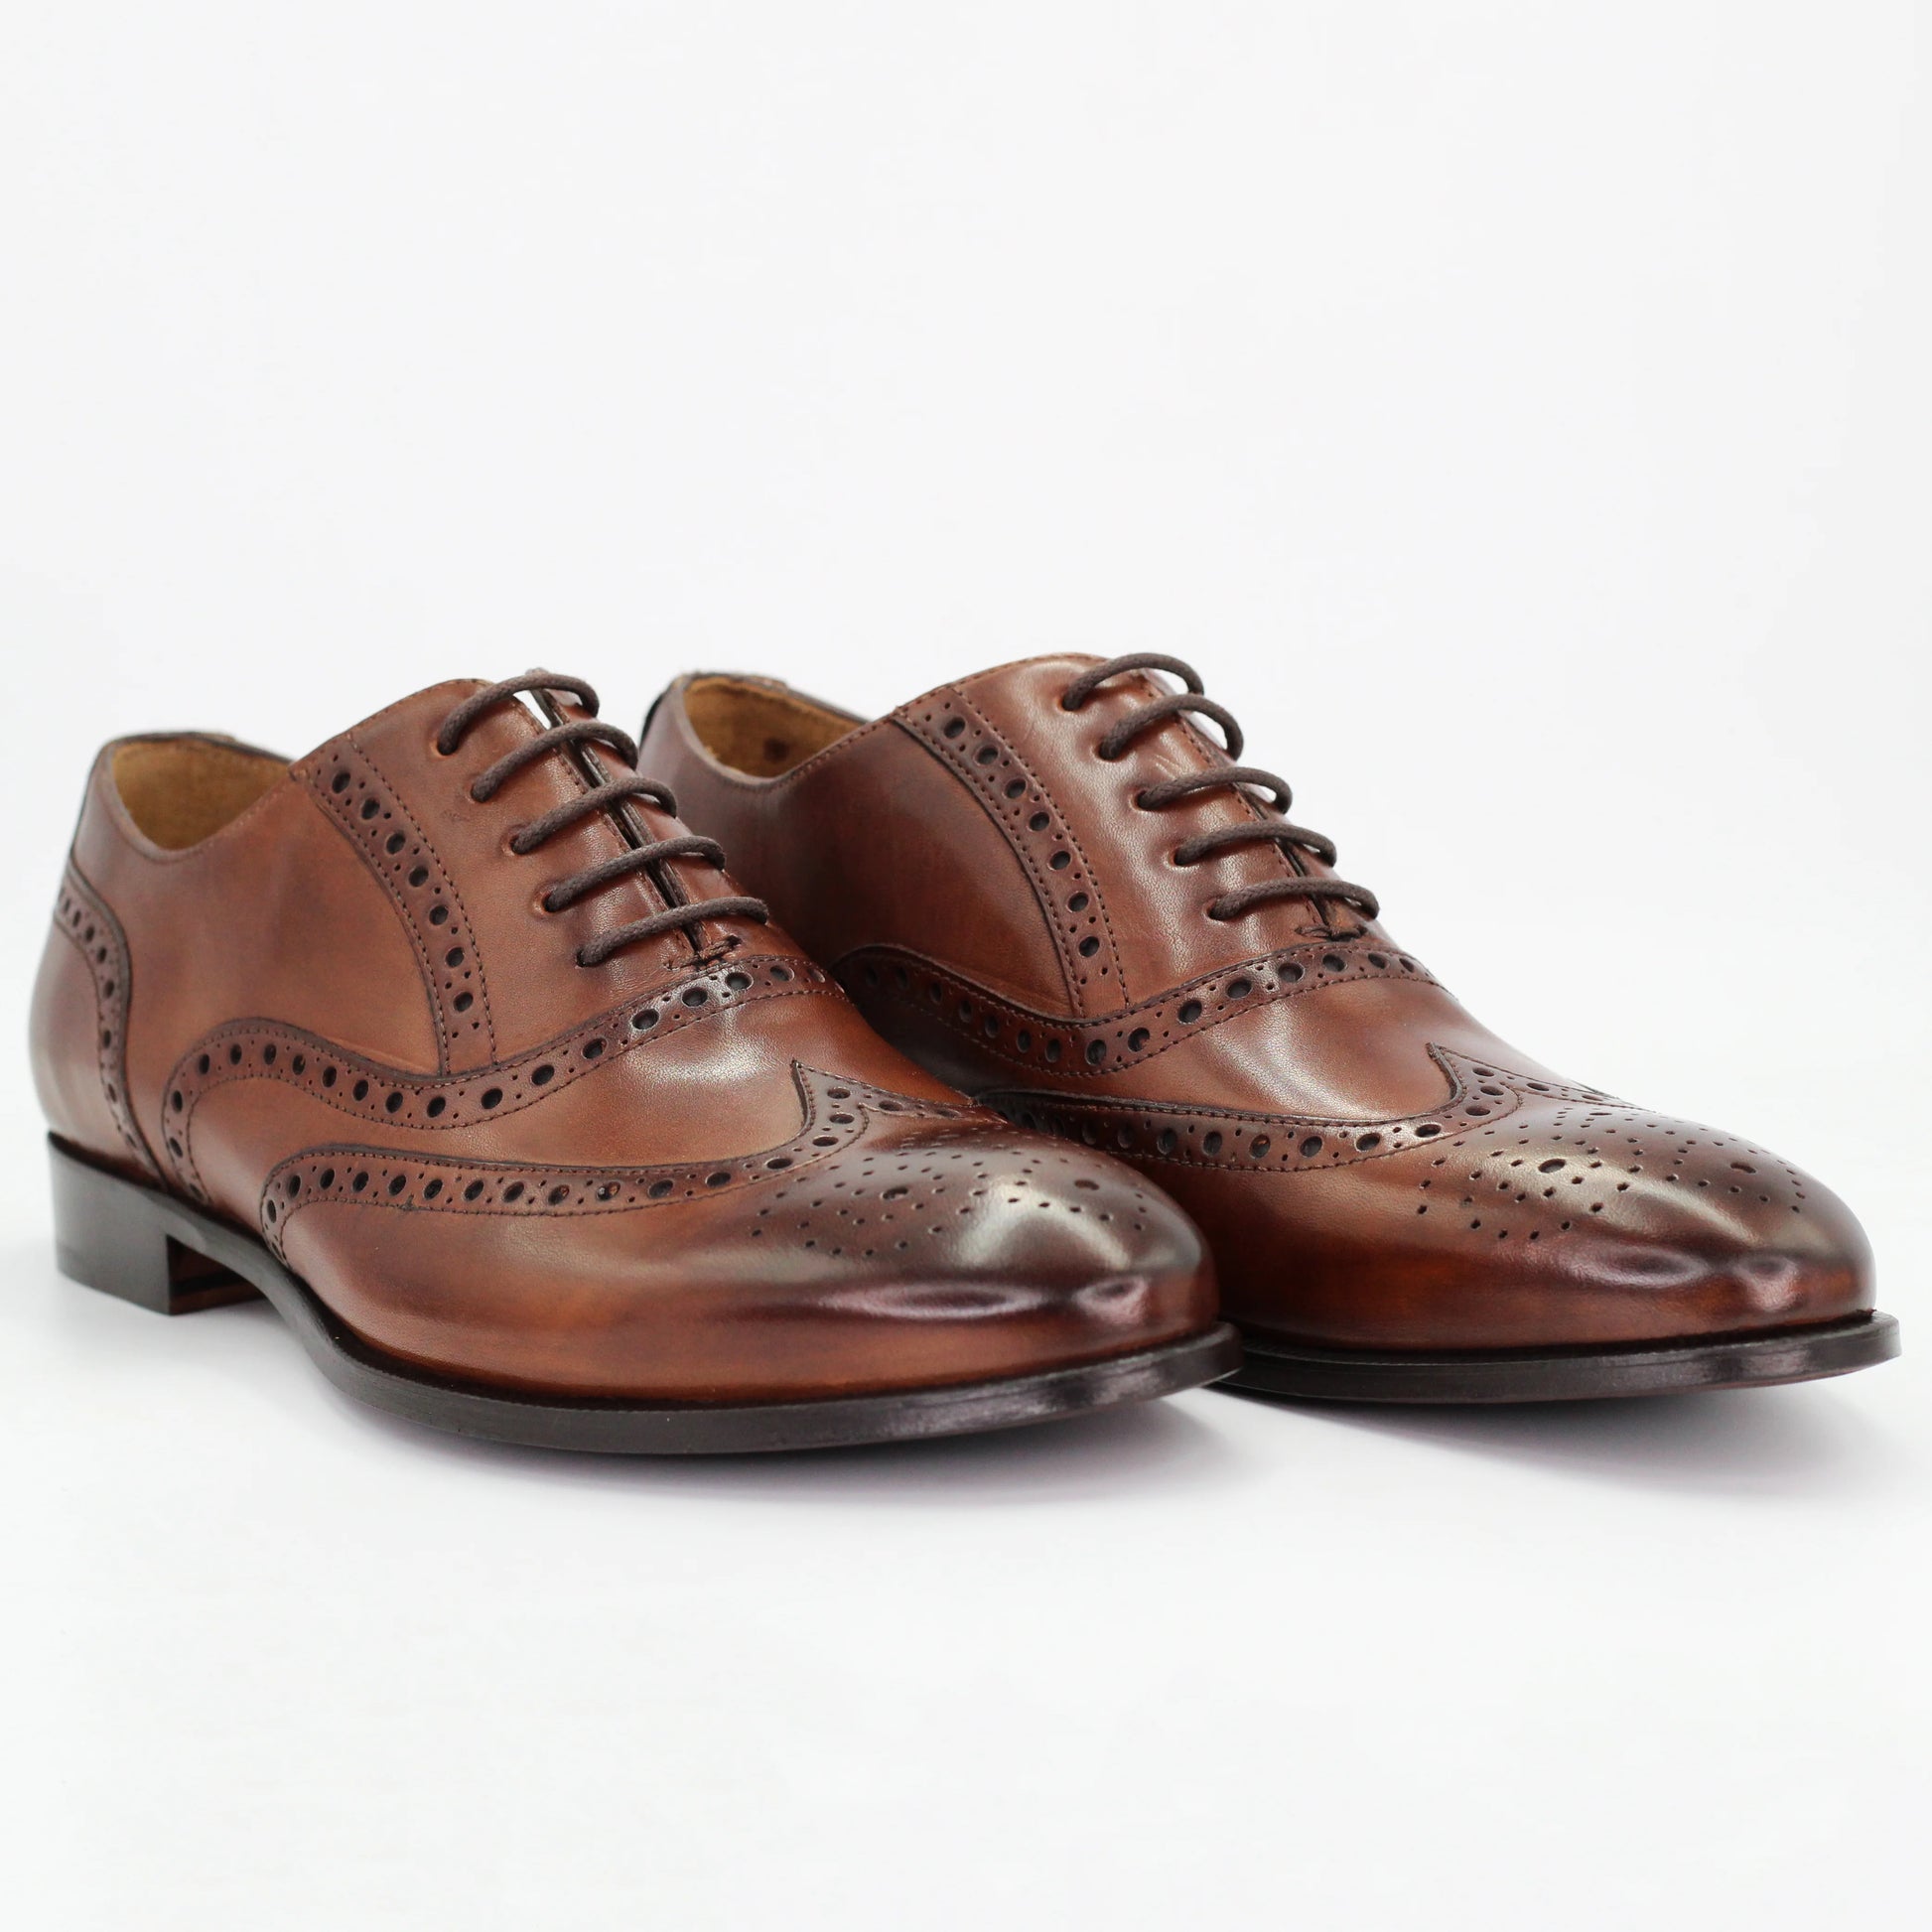 Shop Handmade Italian Leather derby brogue in brandy (BRU11911) or browse our range of hand-made Italian shoes in leather or suede in-store at Aliverti Cape Town, or shop online. We deliver in South Africa & offer multiple payment plans as well as accept multiple safe & secure payment methods.